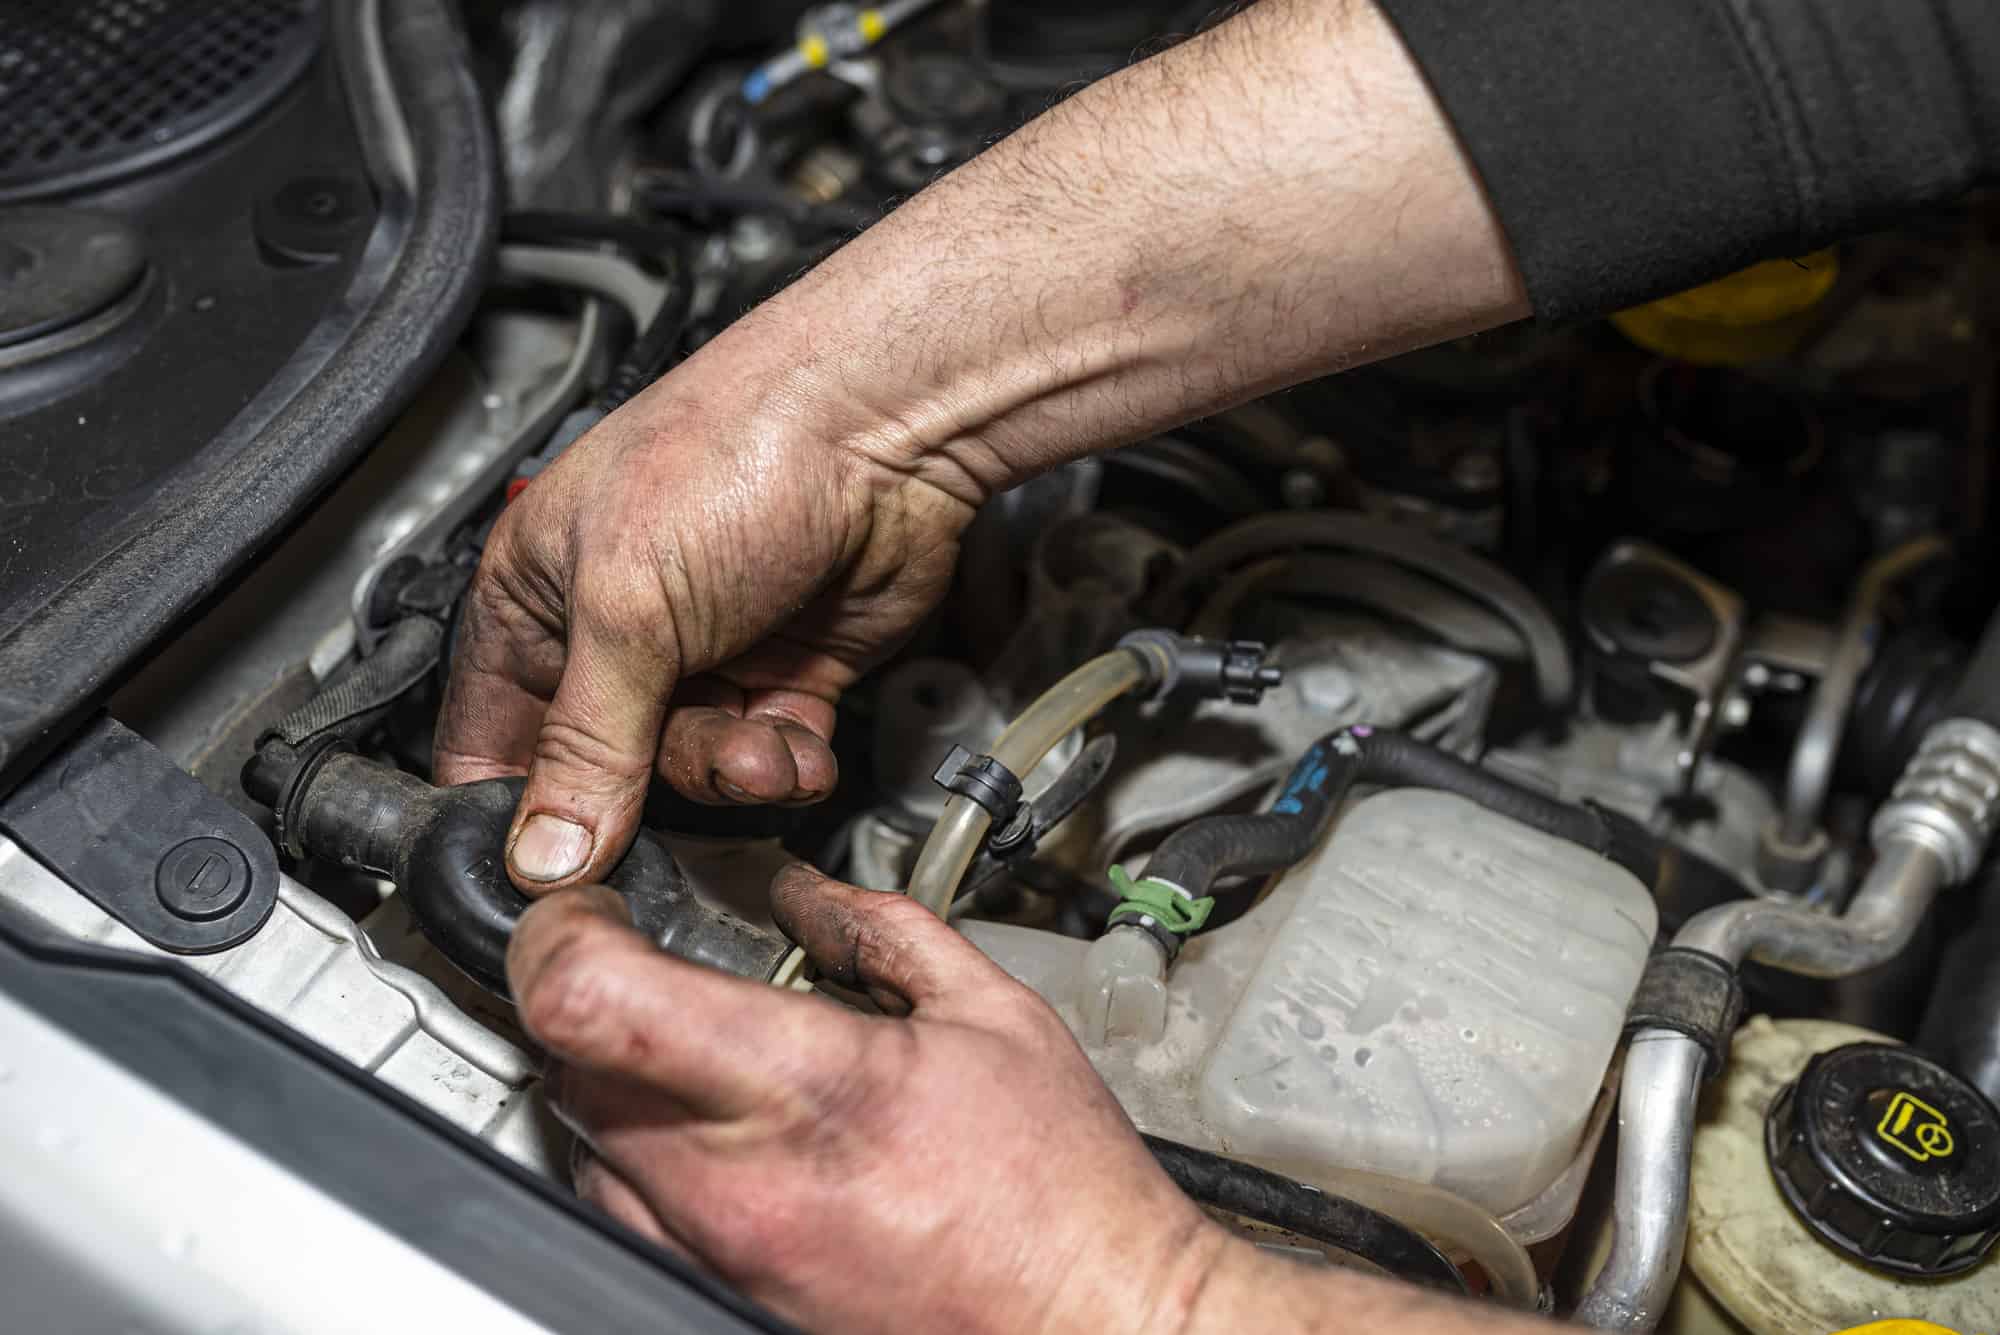 Can A Clogged Fuel Filter Cause An Engine Misfire?